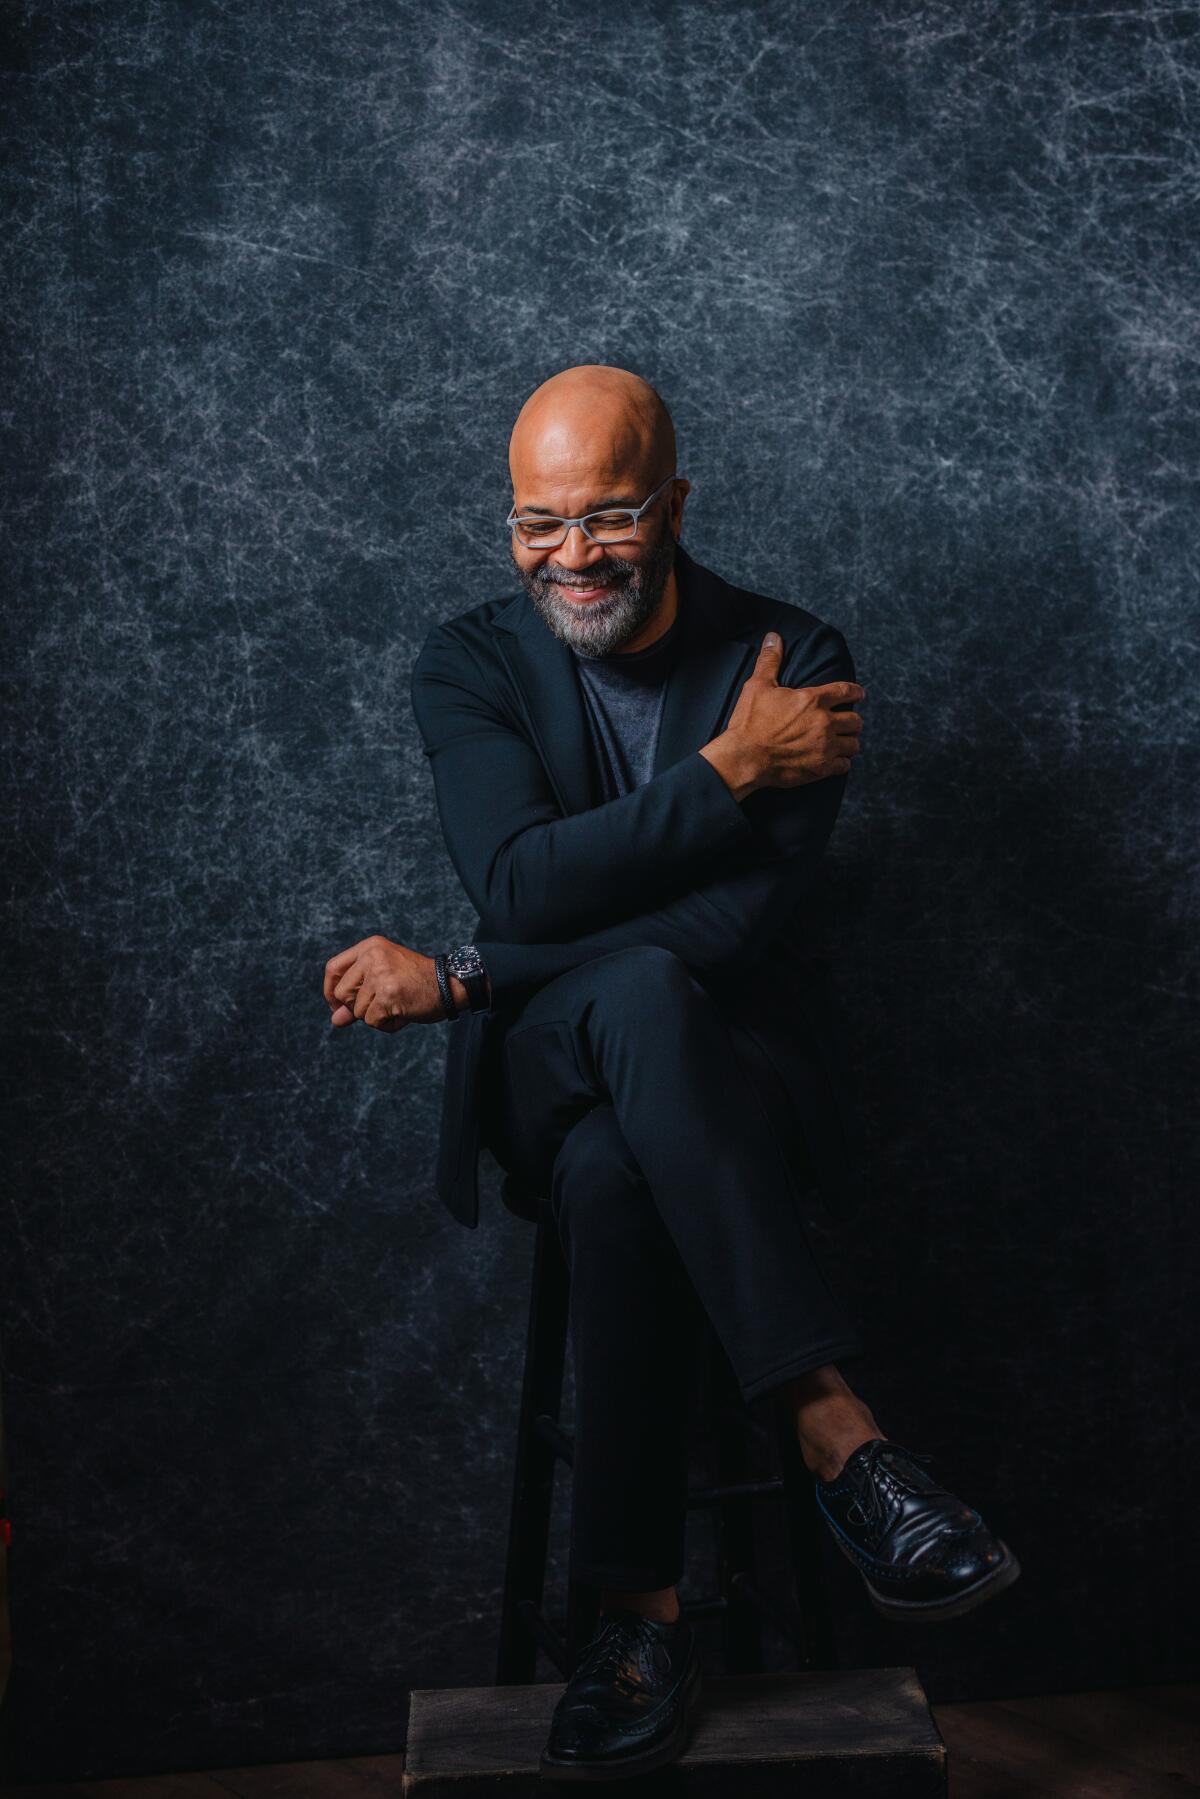 Jeffrey Wright crosses his arms, sits on a stool and looks down at a portrait.